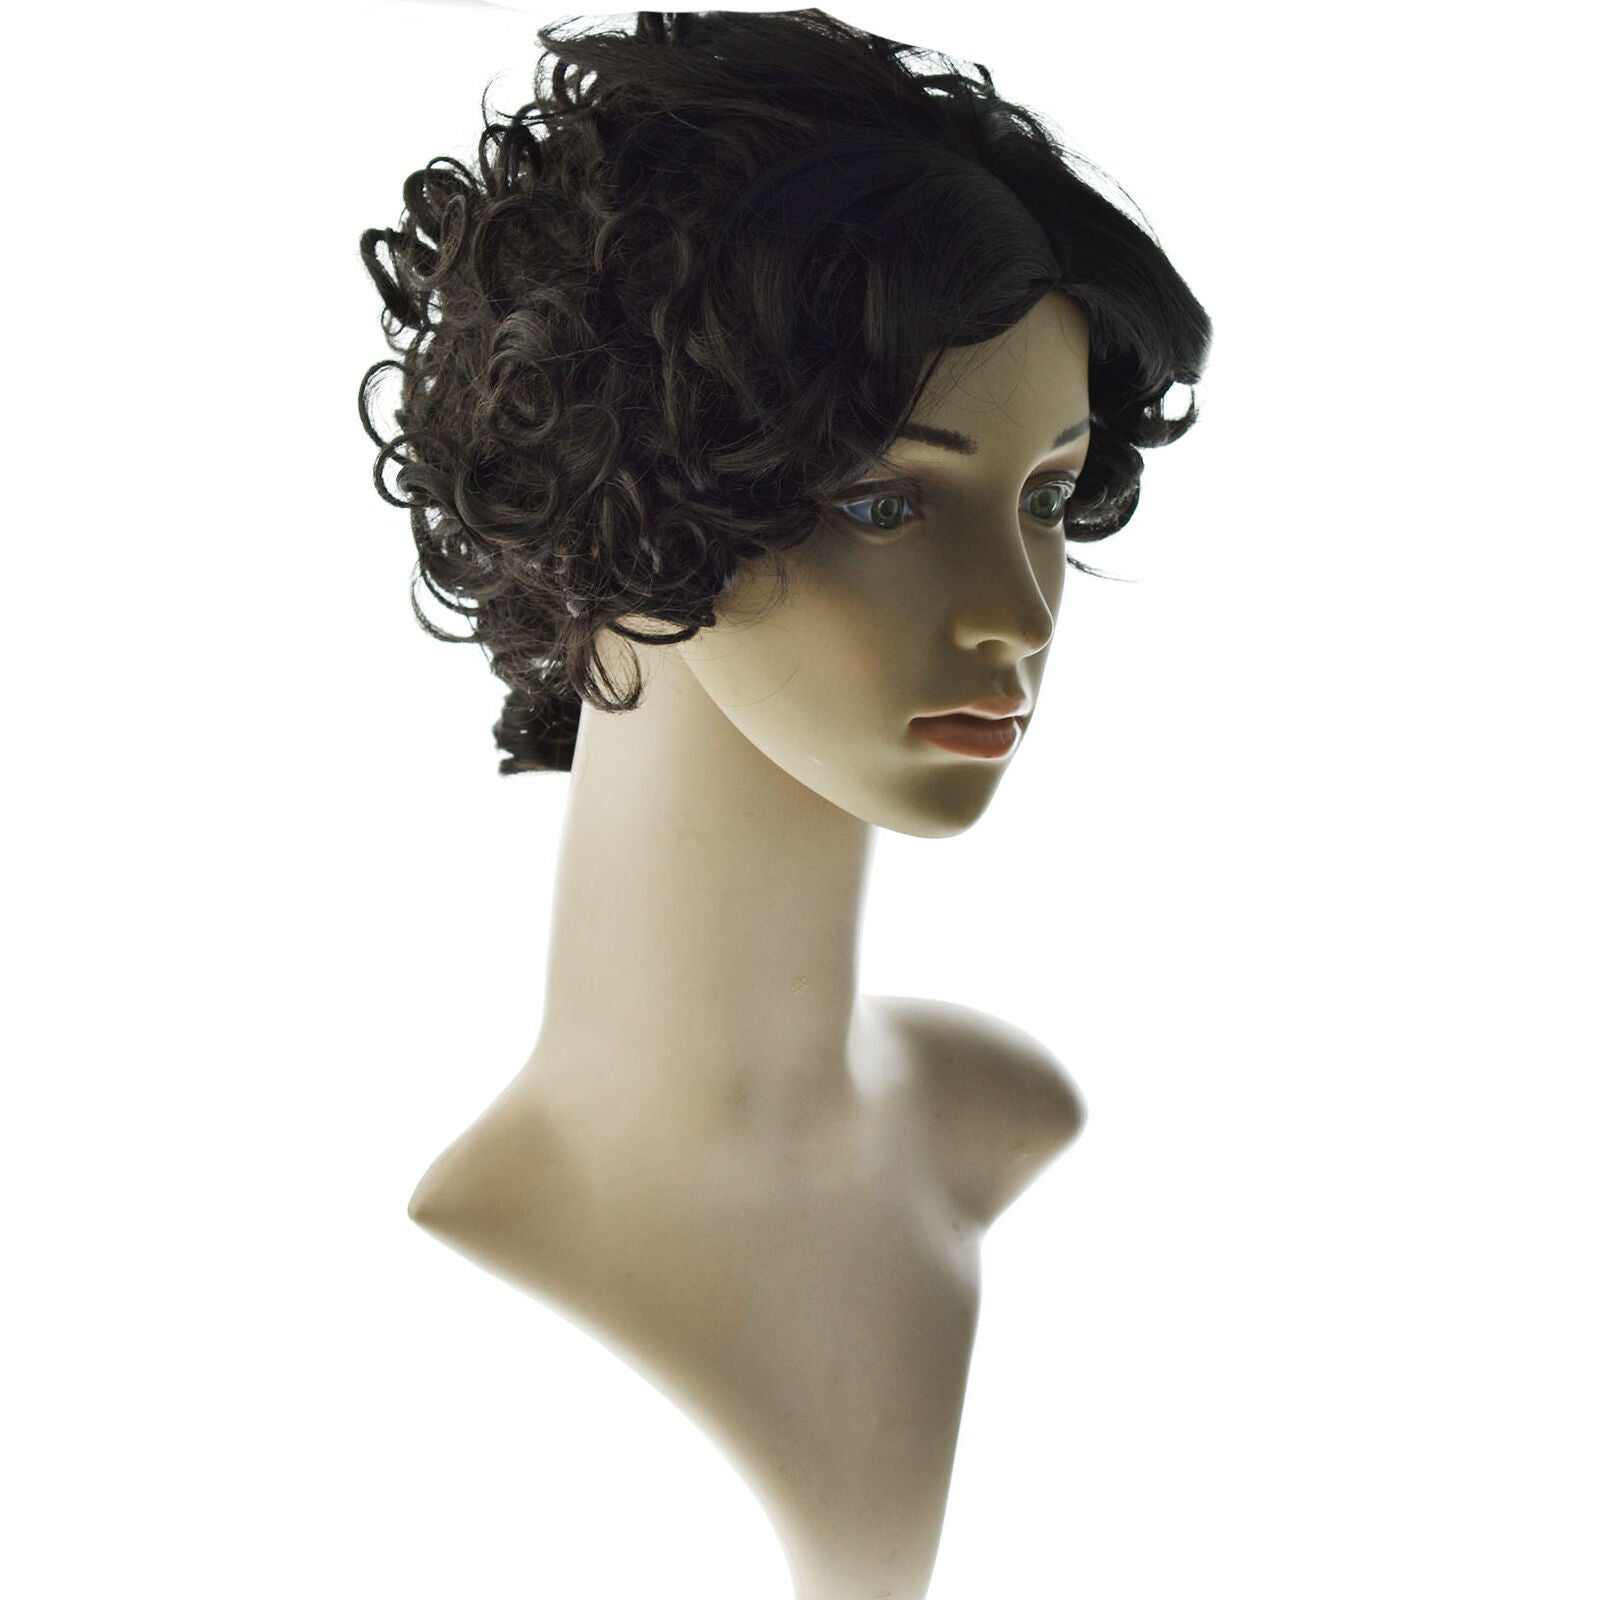 Women Real Short Curly Wigs Hair Pixie Wavy African Bob Style Full Wigs